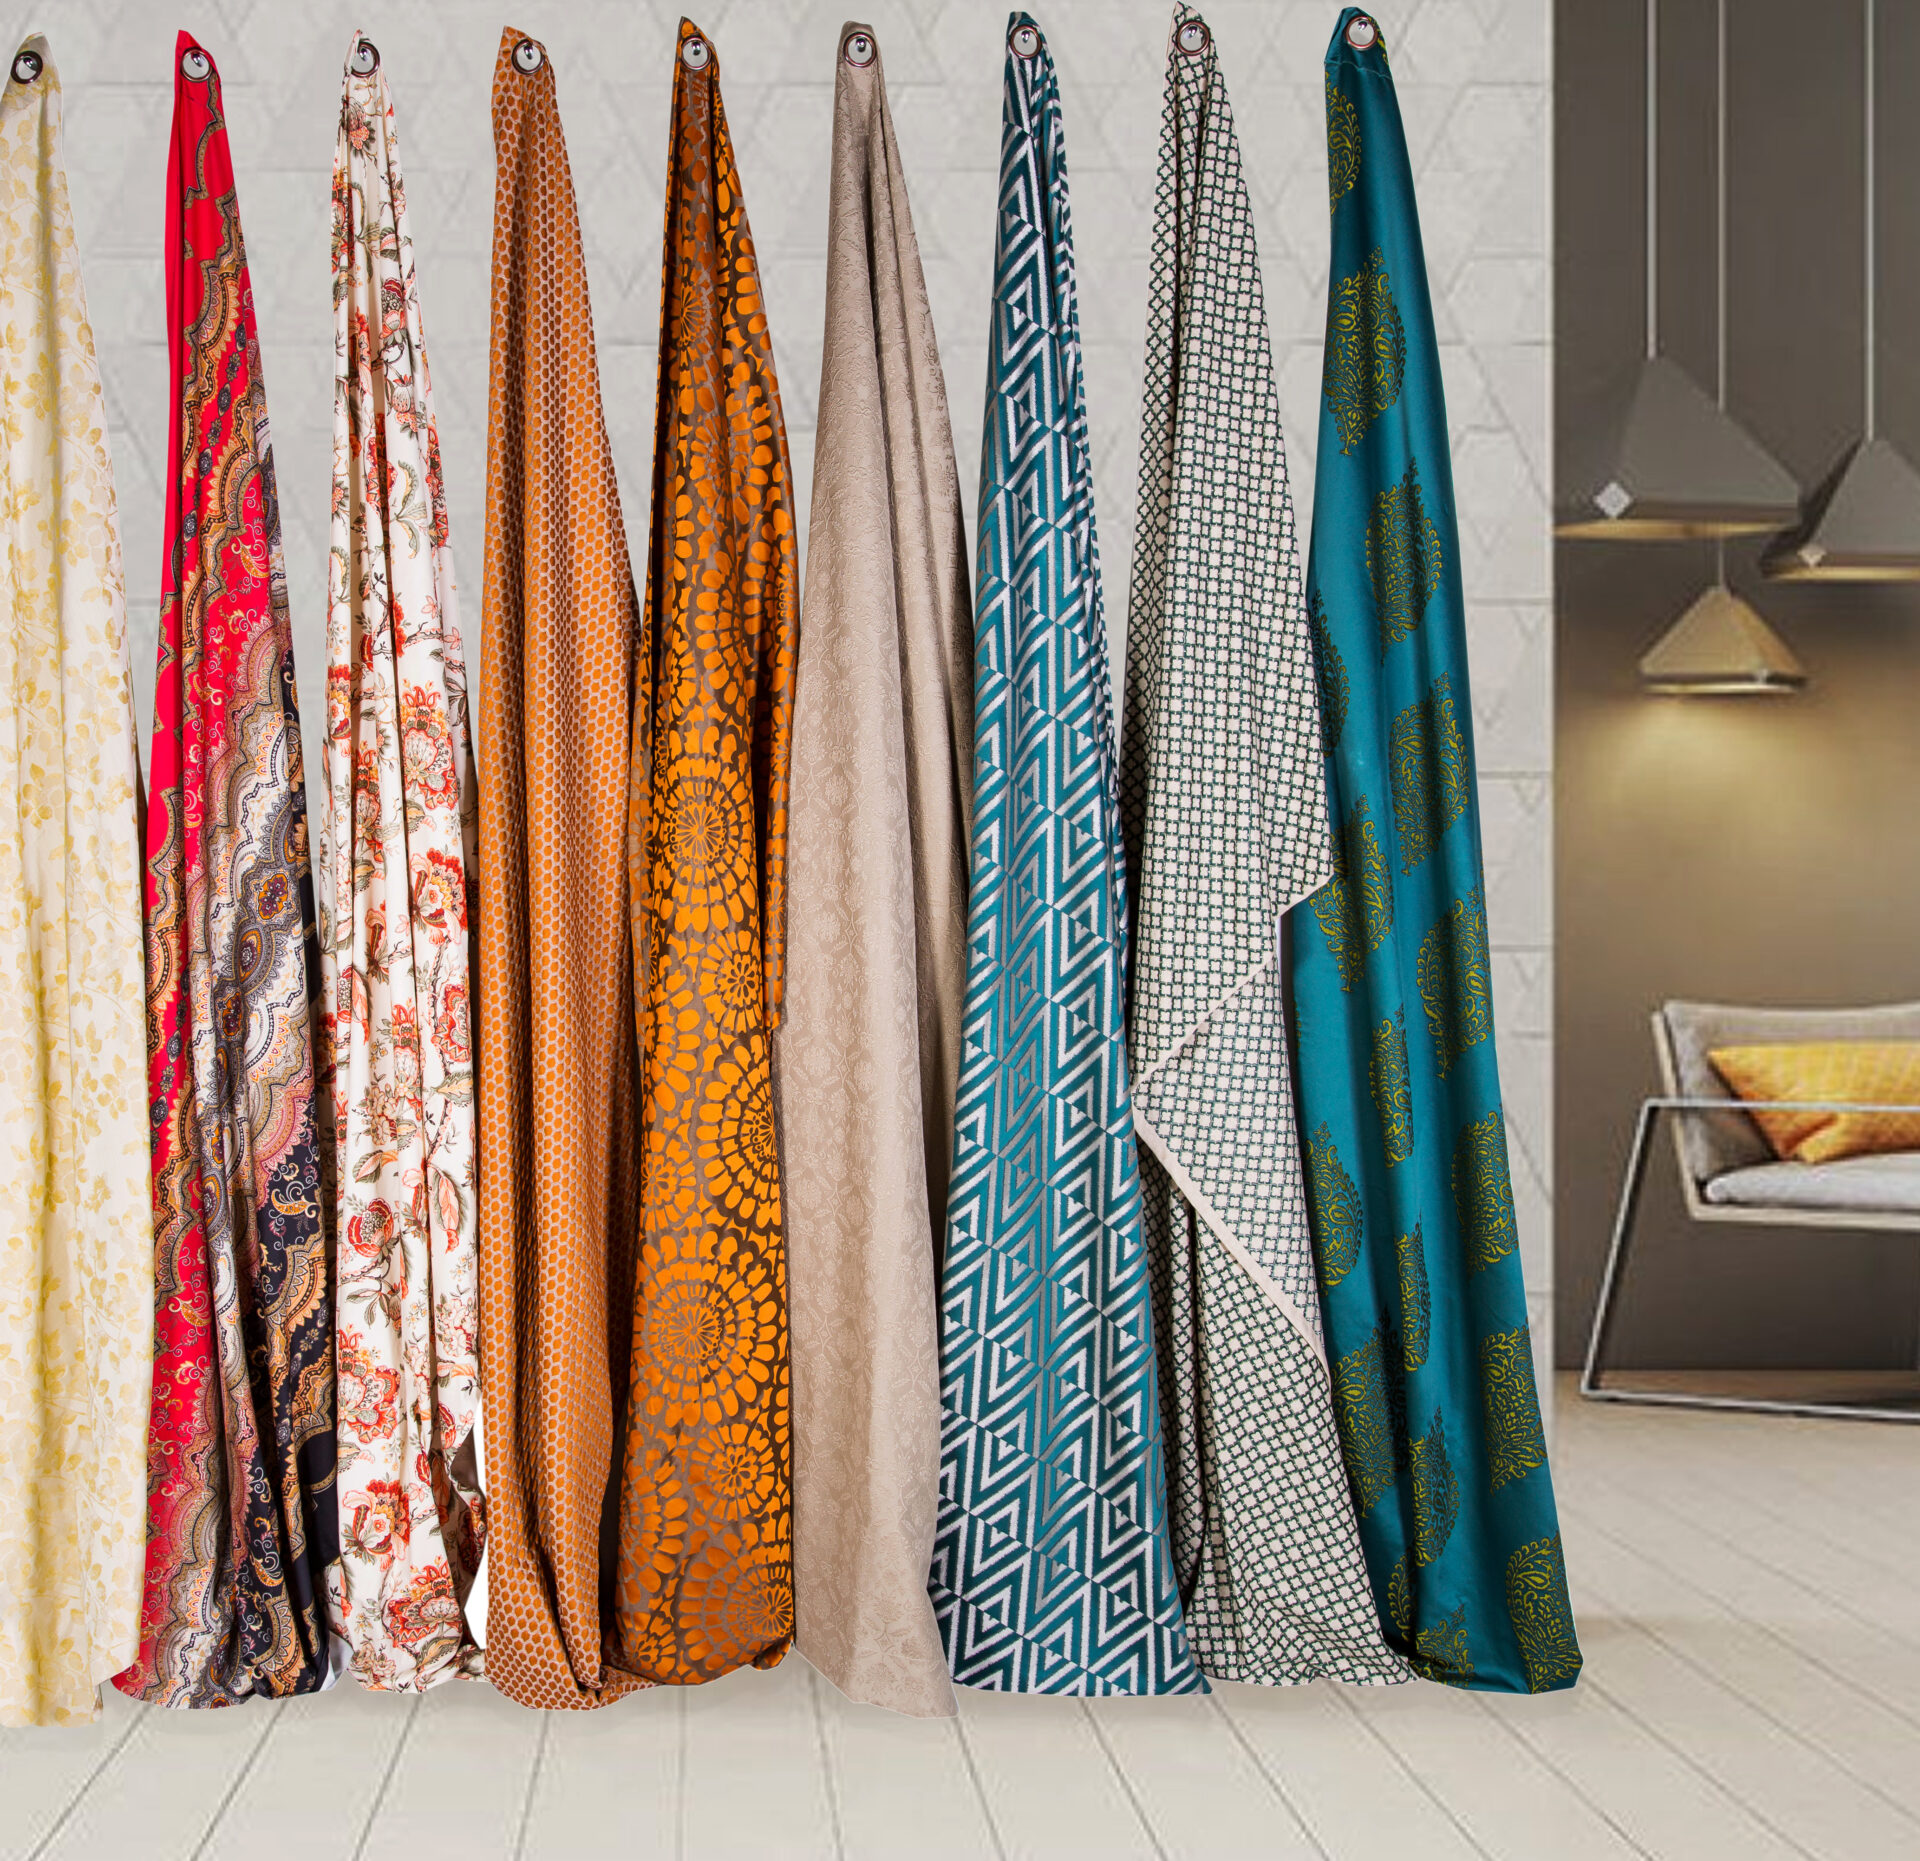 4 Tips On Picking Out Your Curtain Fabrics